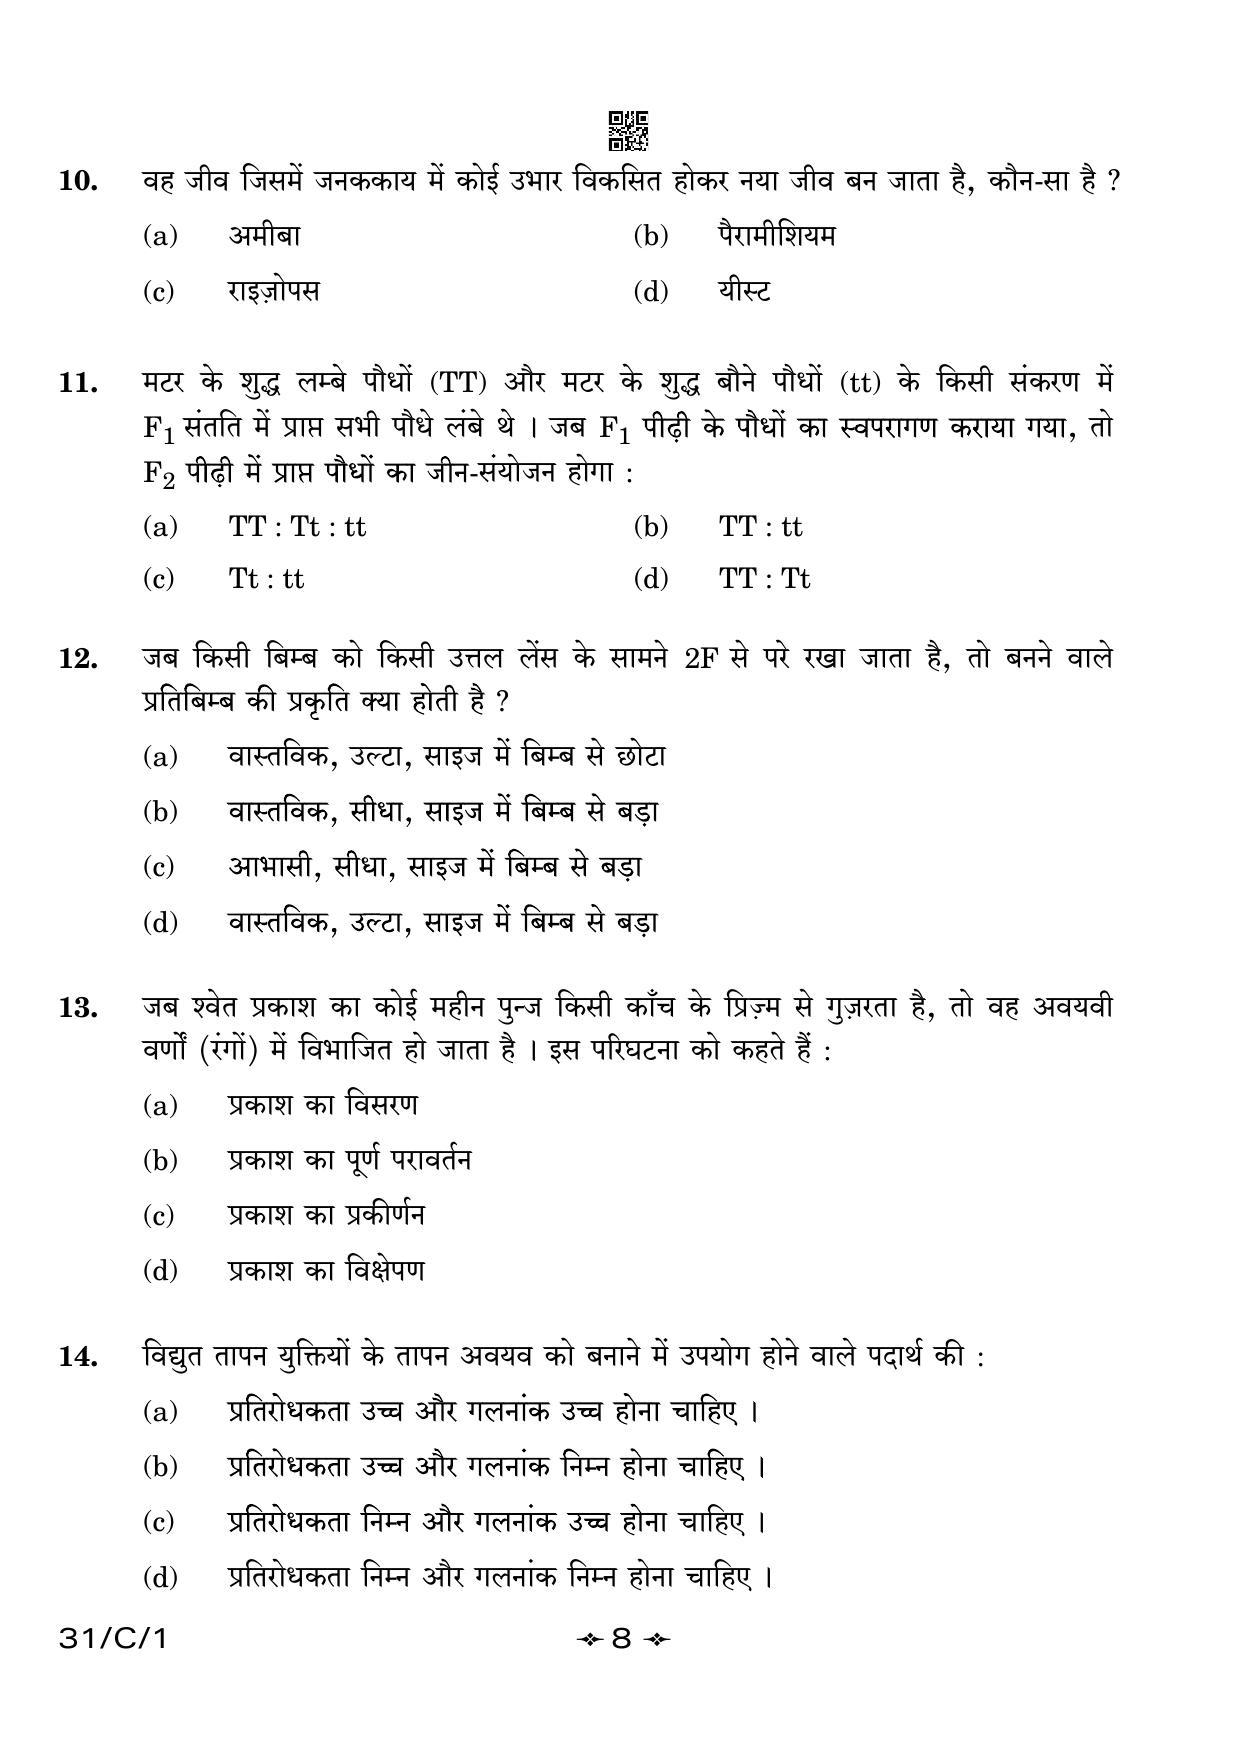 CBSE Class 10 31-1 Science 2023 (Compartment) Question Paper - Page 8